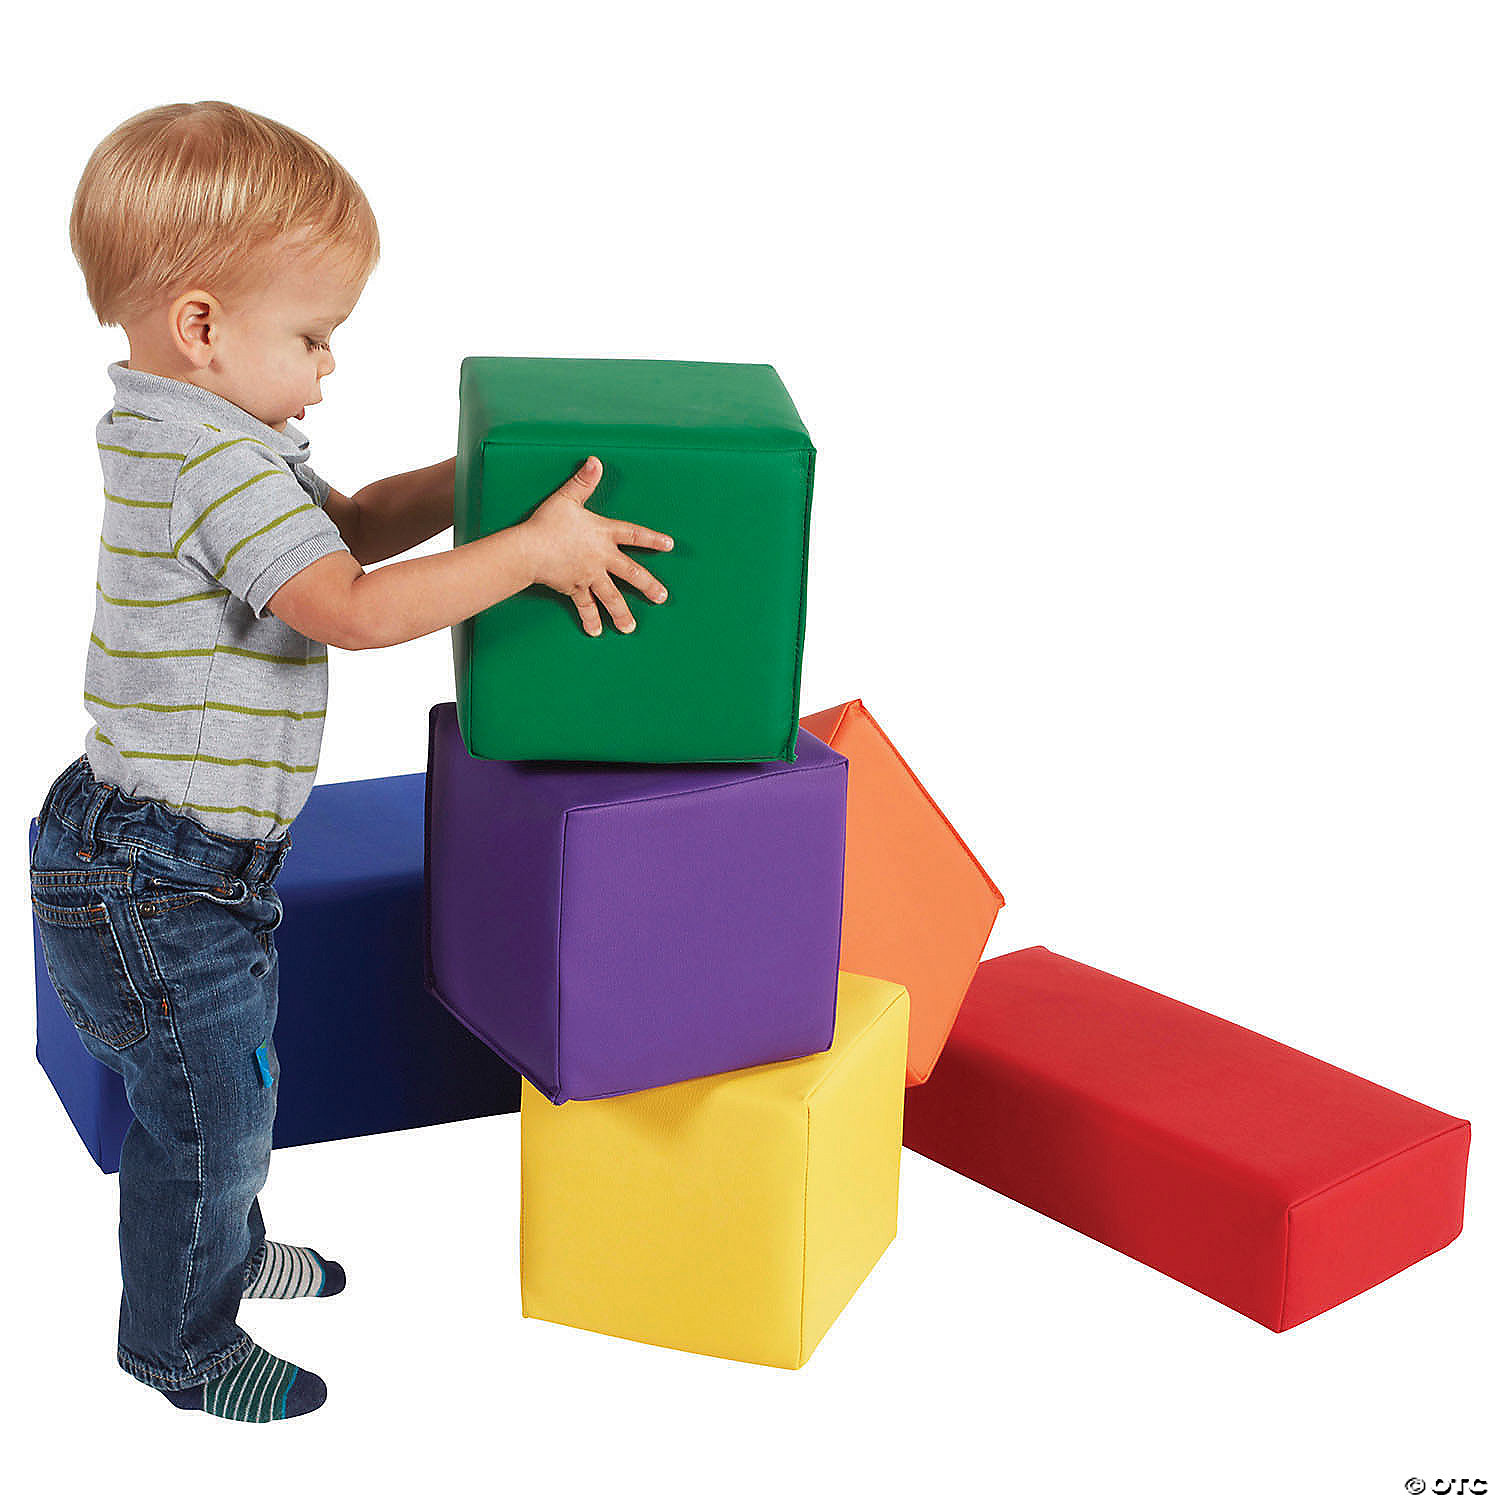 - Assorted Soft Play Set for Toddlers and Kids 6-Piece Set Factory Direct Partners SoftScape Stack-a-Block Big Foam Construction Building Blocks 